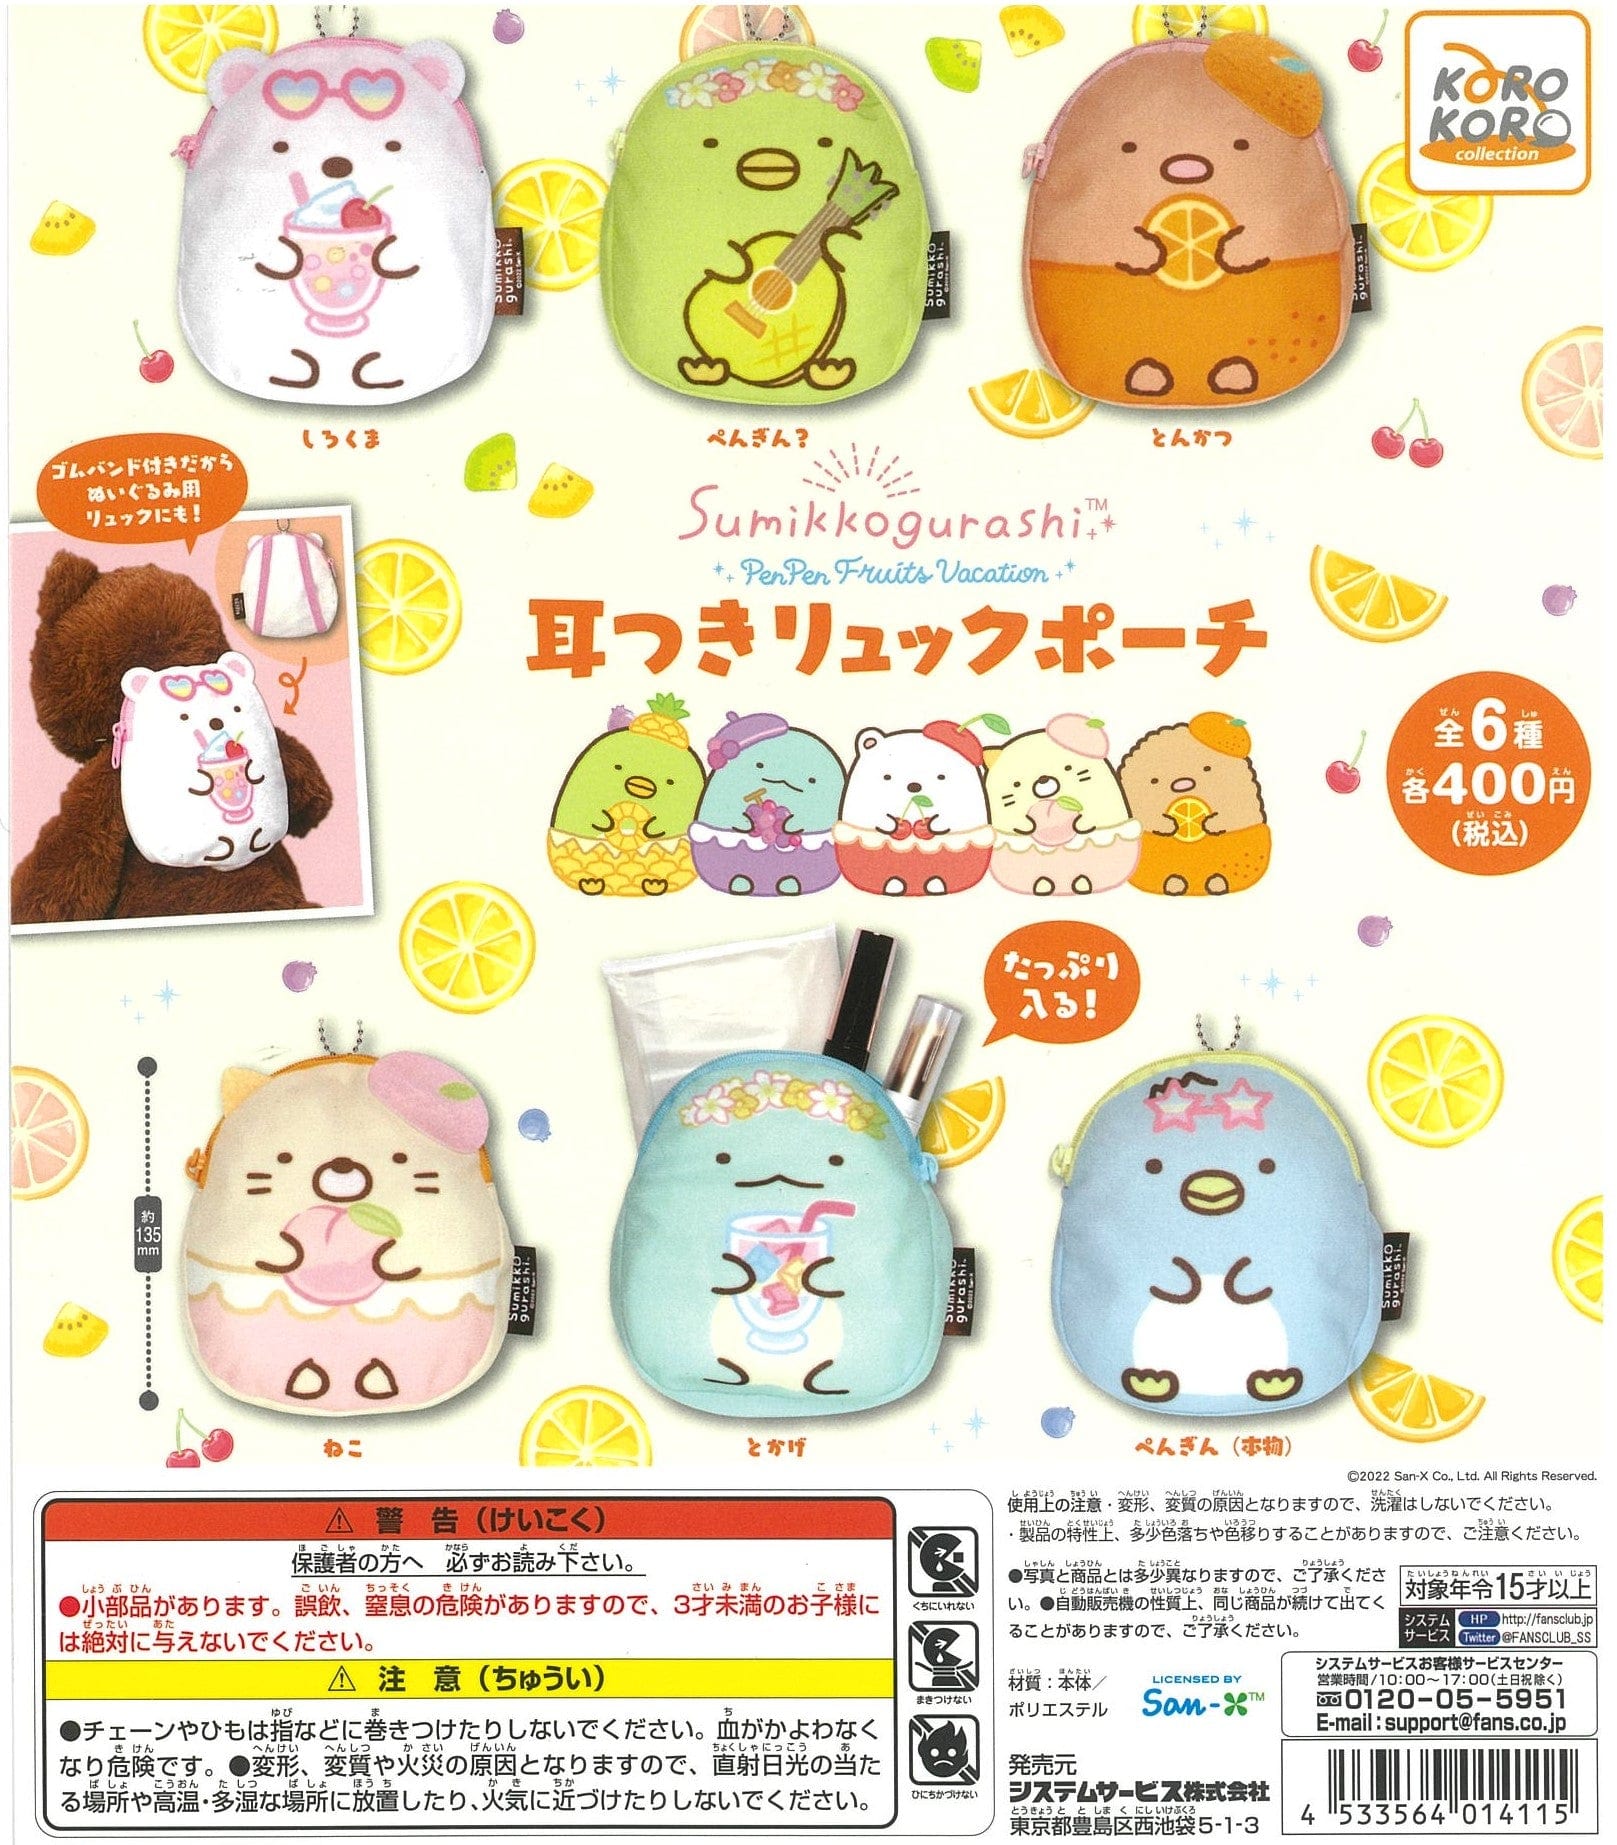 KoroKoro Collection CP1800 "Sumikkogurashi" Backpack Pouch with Ears